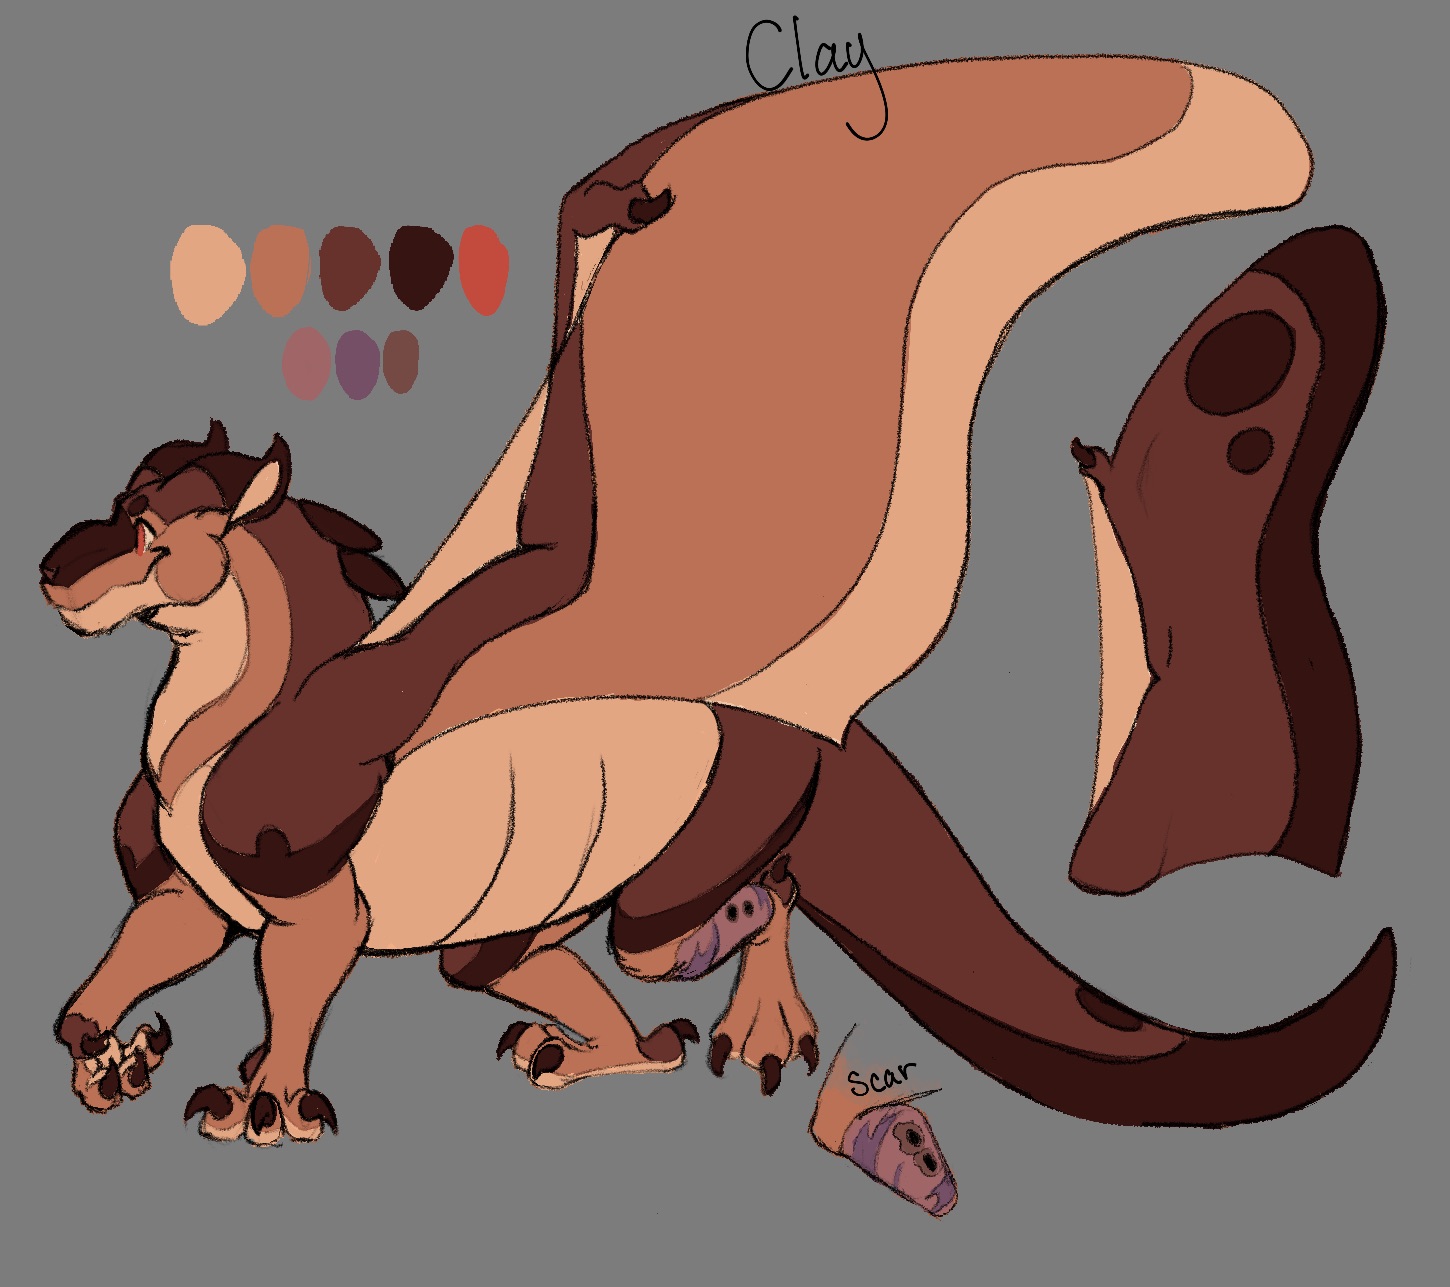 Clay from Wings of Fire